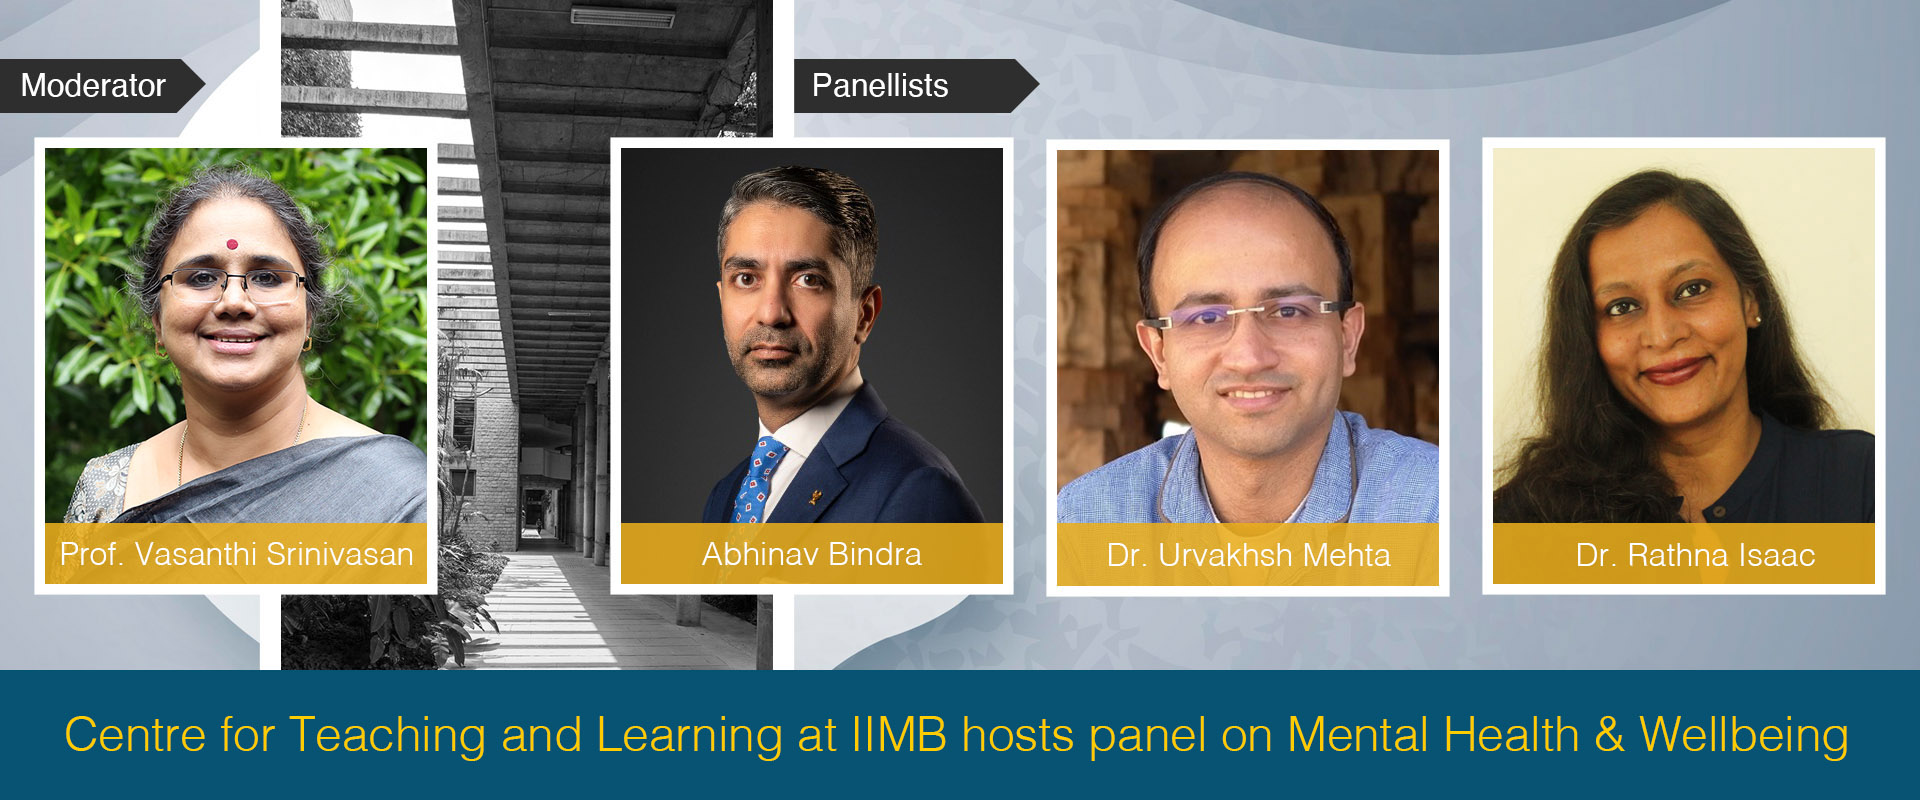 Centre for Teaching and Learning at IIMB hosts panel on Mental Health & Wellbeing